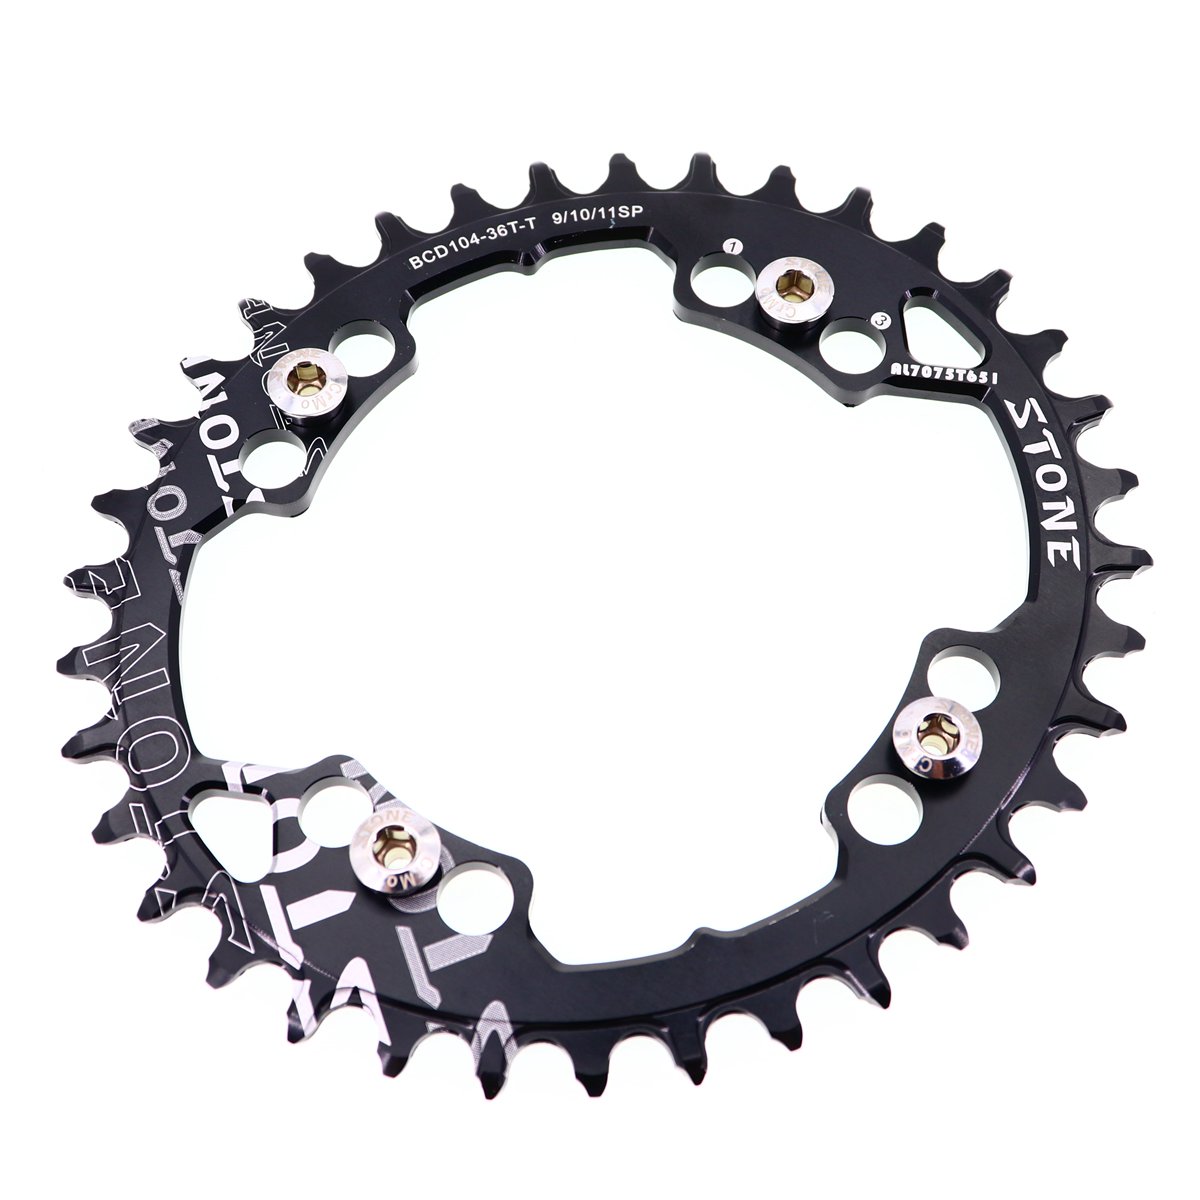 Circle Chainring Narrow Wide Tooth For BCD104 Crankset SRAM X0 X9 X5 X7 M820 